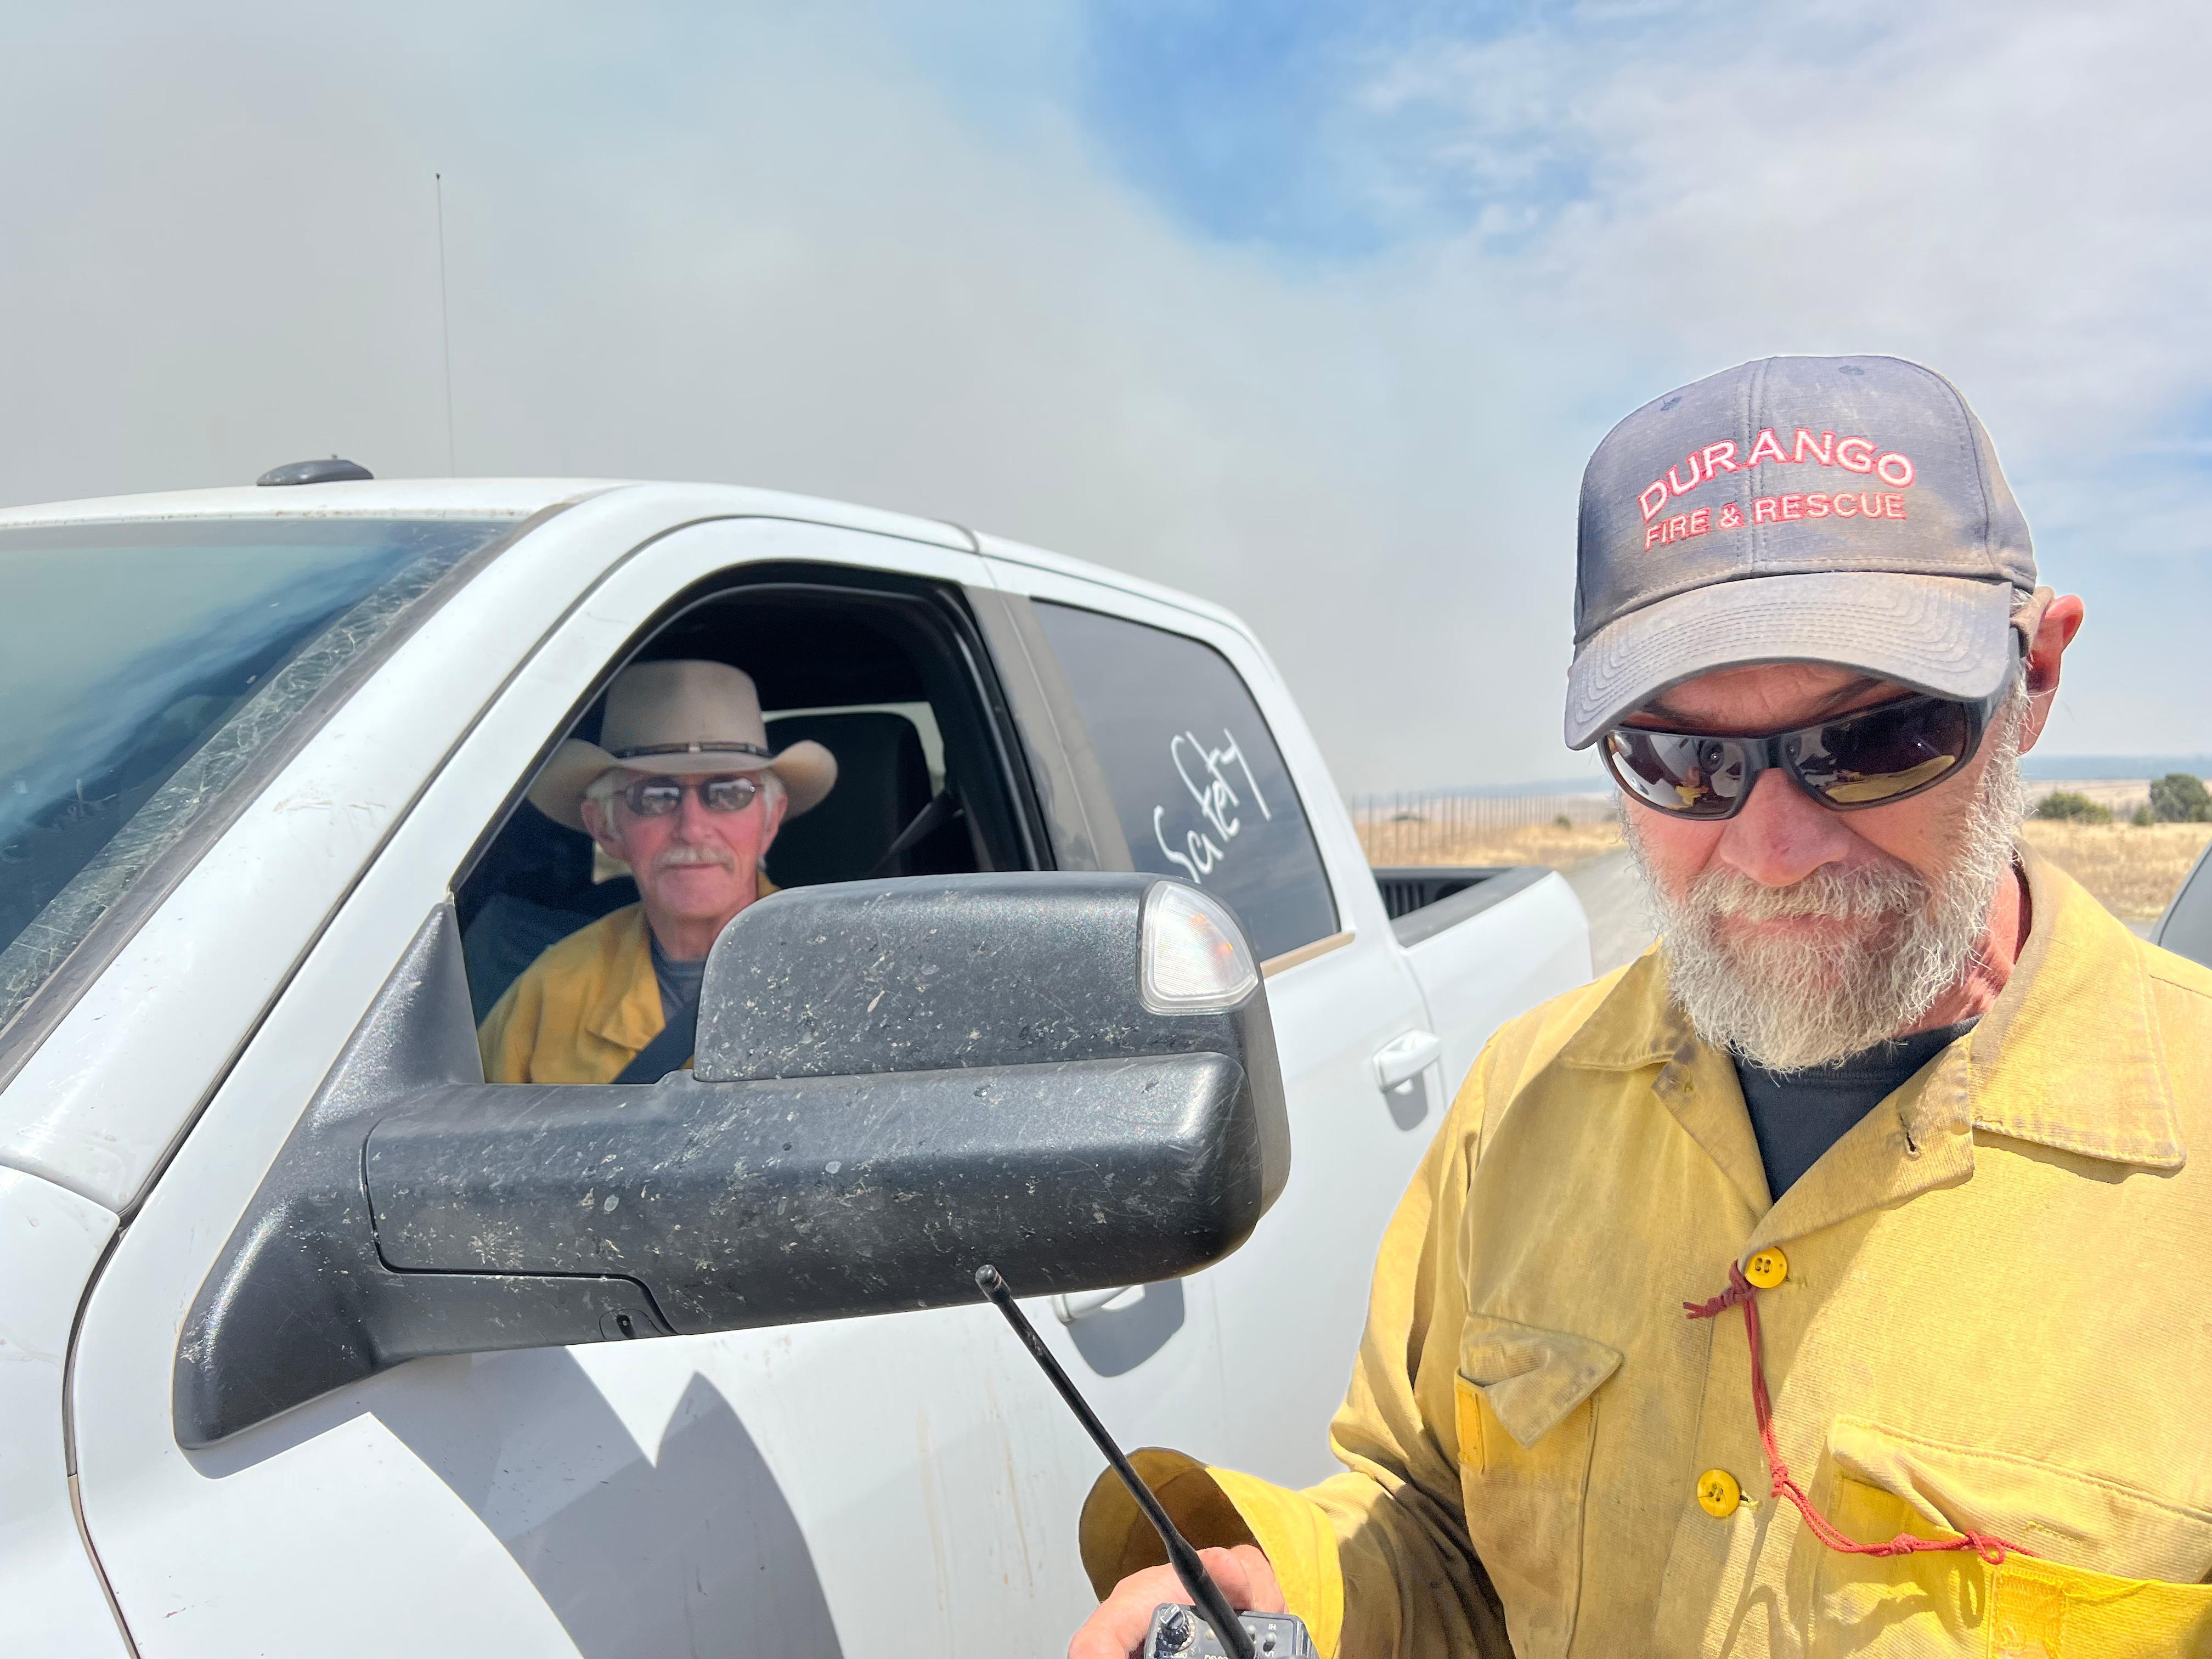 Experienced firefighters serve as safety officers, day and night, across different areas of the fire. In this instance, they had just informed the photographer that the fire was moving closer and it was time to move farther away.